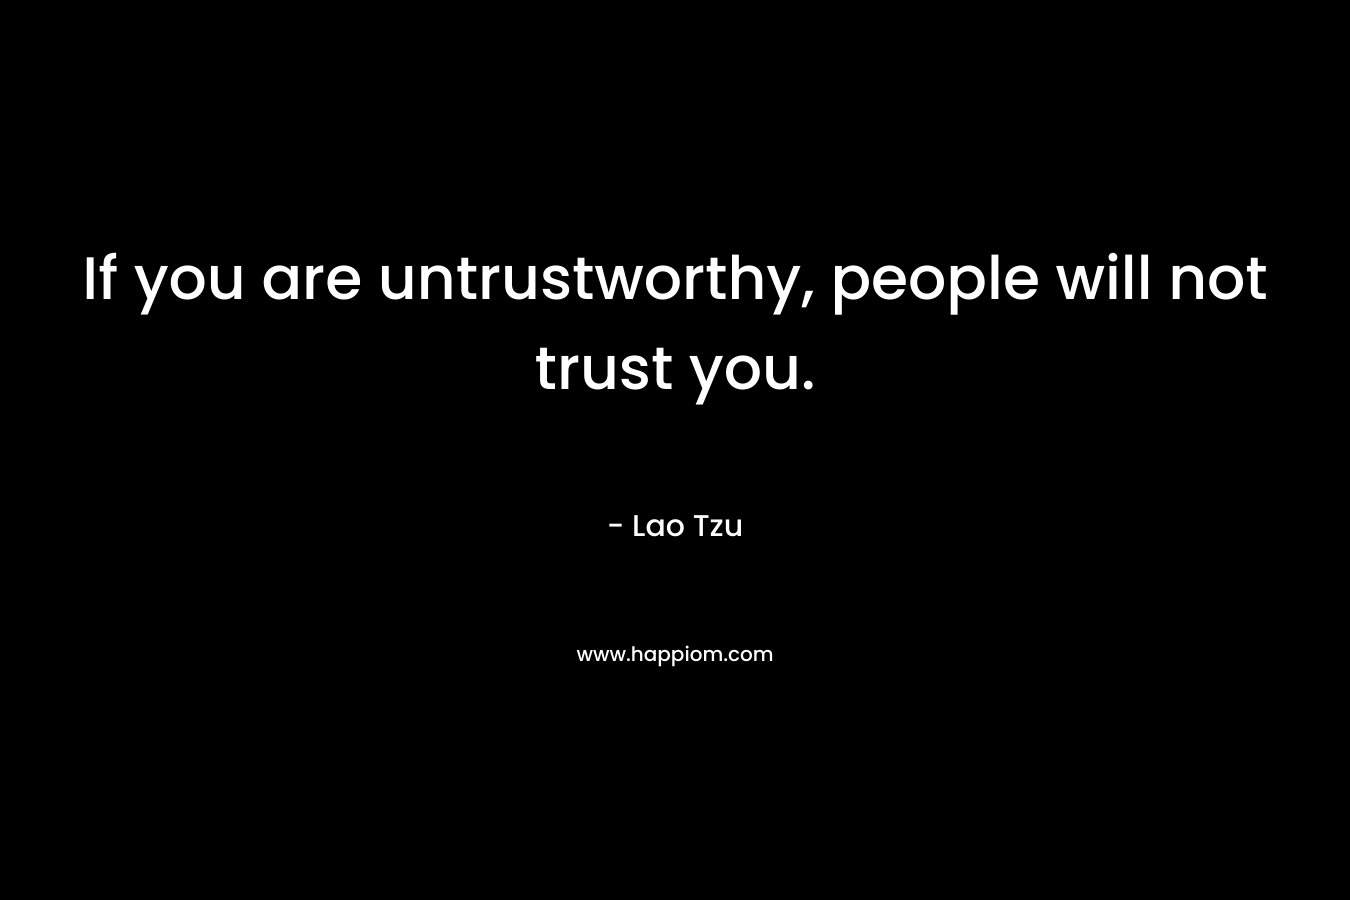 If you are untrustworthy, people will not trust you. – Lao Tzu